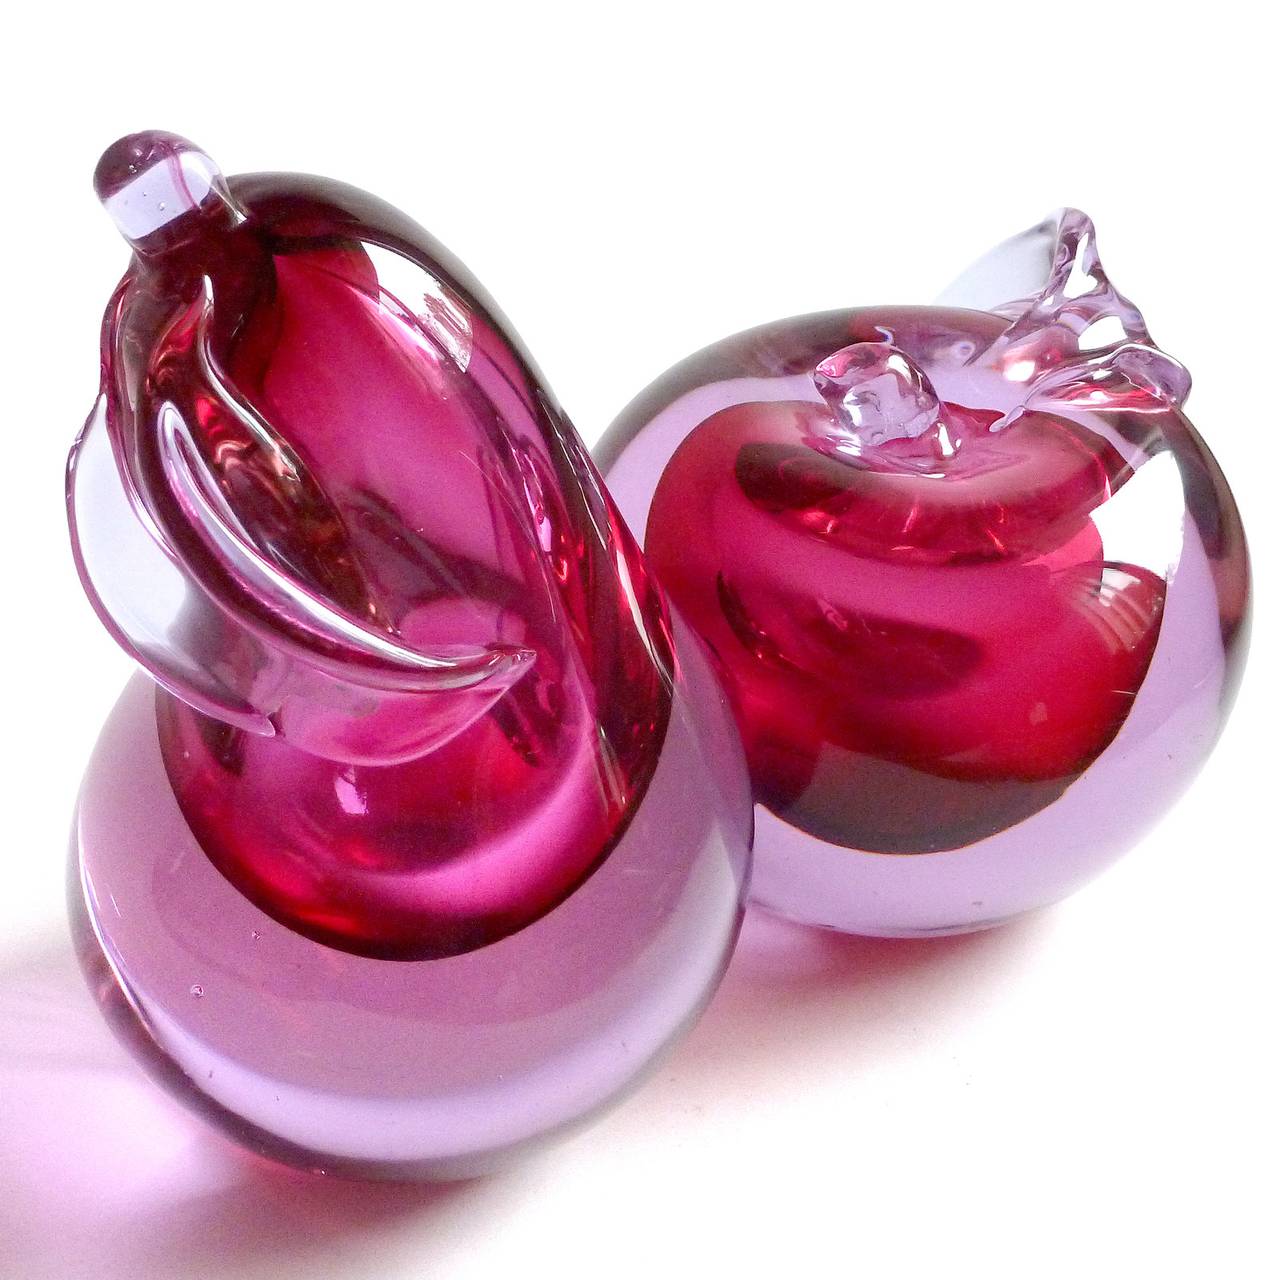 FREE Shipping Worldwide! See details below description.

Very Large Murano Hand Blown Apple and Pear Sommerso Lavender Pink with Red Cores Art Glass Bookends. Documented to the Cenedese company. As you can see, the outside layers change color to